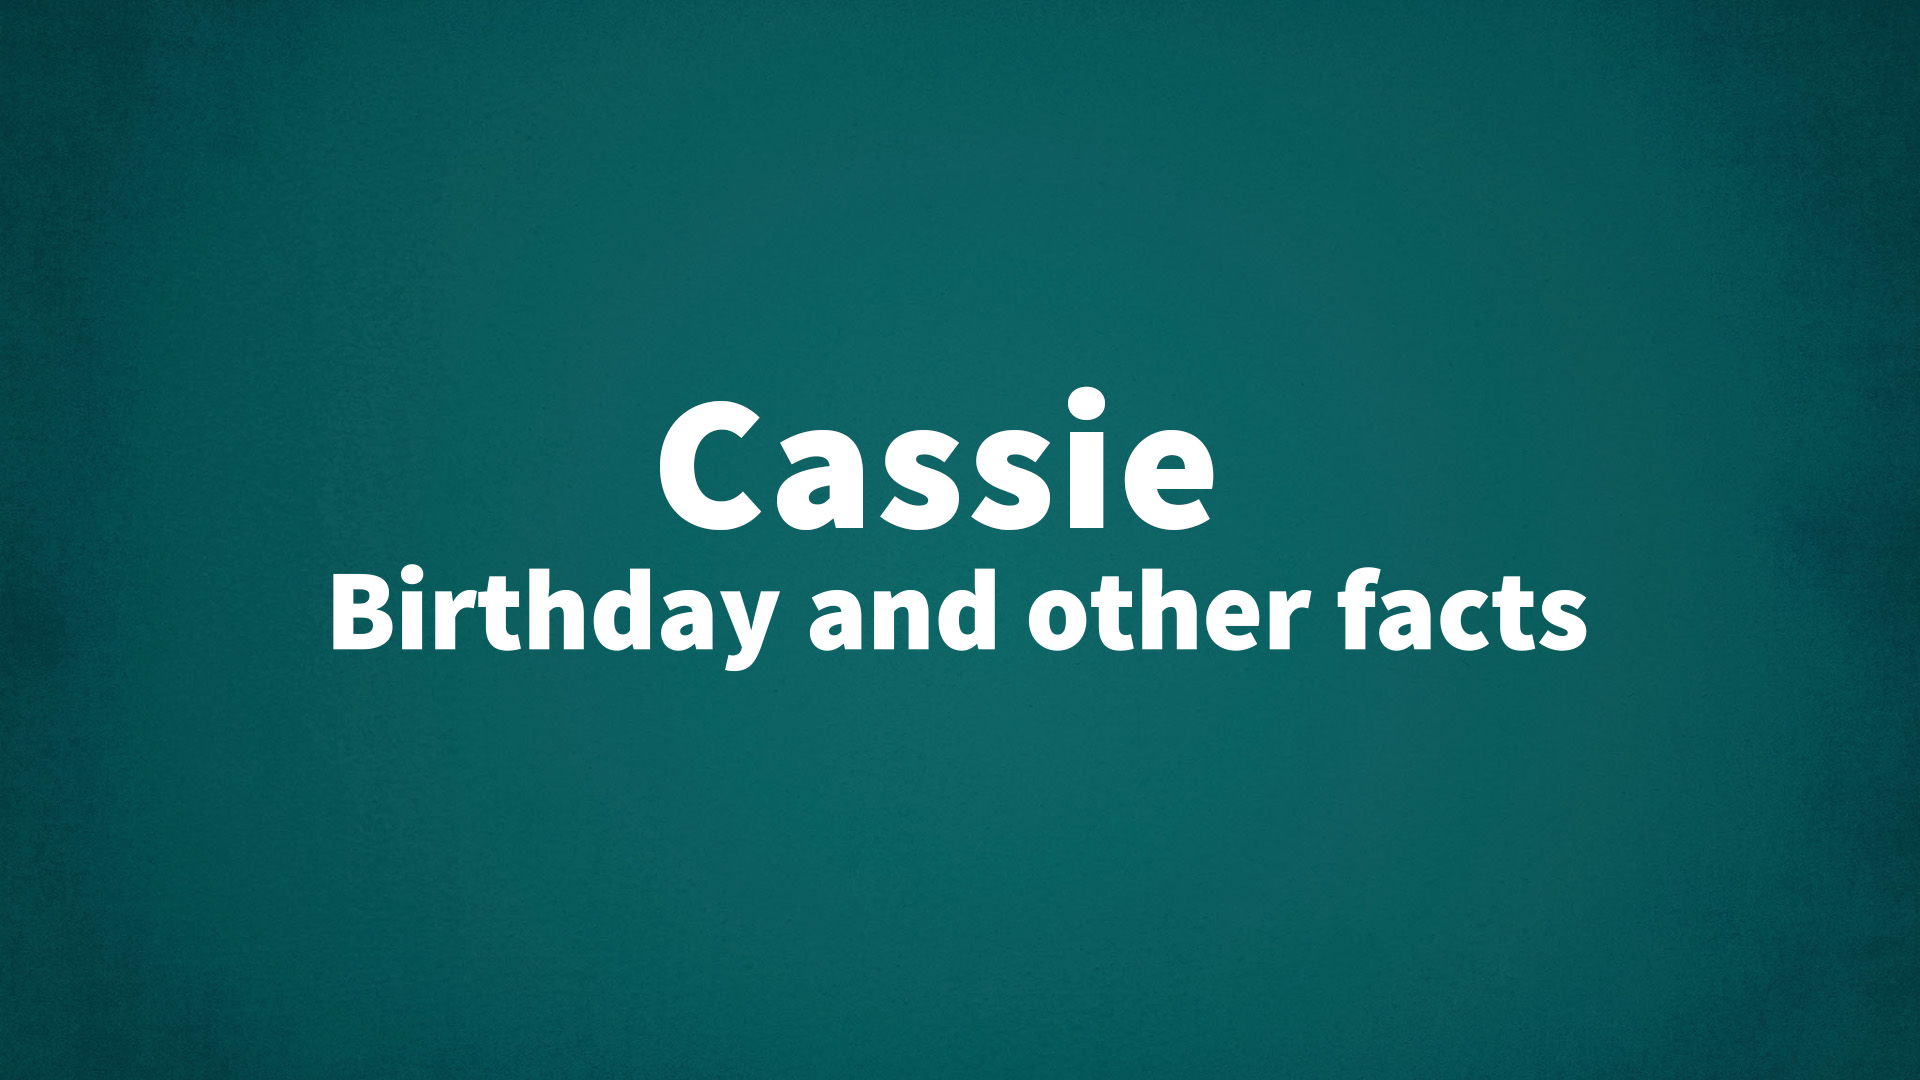 Cassie - Birthday and other facts